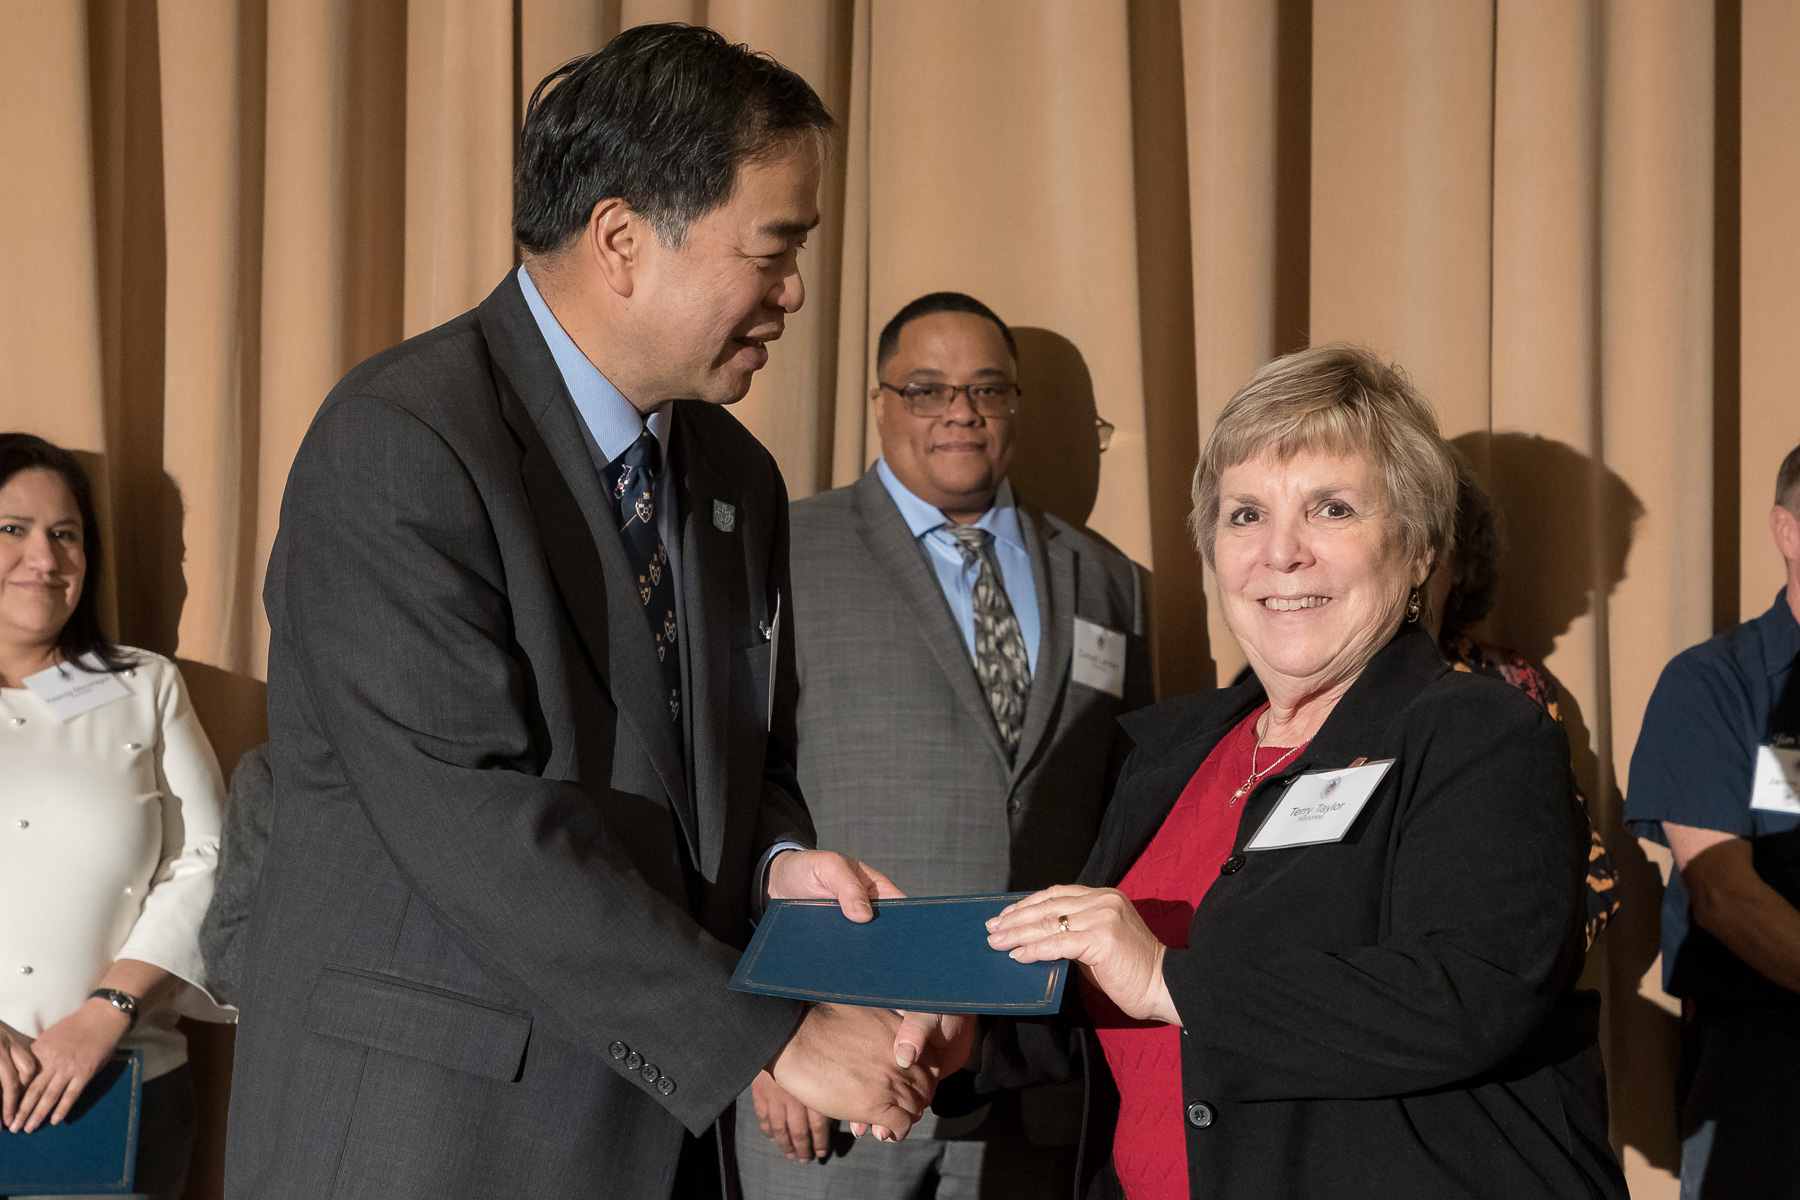 Terry Taylor, right, with A. Gabriel Esteban, Ph.D., president, as faculty and staff members are inducted into DePaul University's 25 Year Club, Tuesday, Nov. 13, 2018, at the Lincoln Park Student Center. Employees celebrating their 25th work anniversary were honored at the luncheon with their colleagues and will have their names added to plaques located on the Loop and Lincoln Park Campuses. (DePaul University/Jeff Carrion)